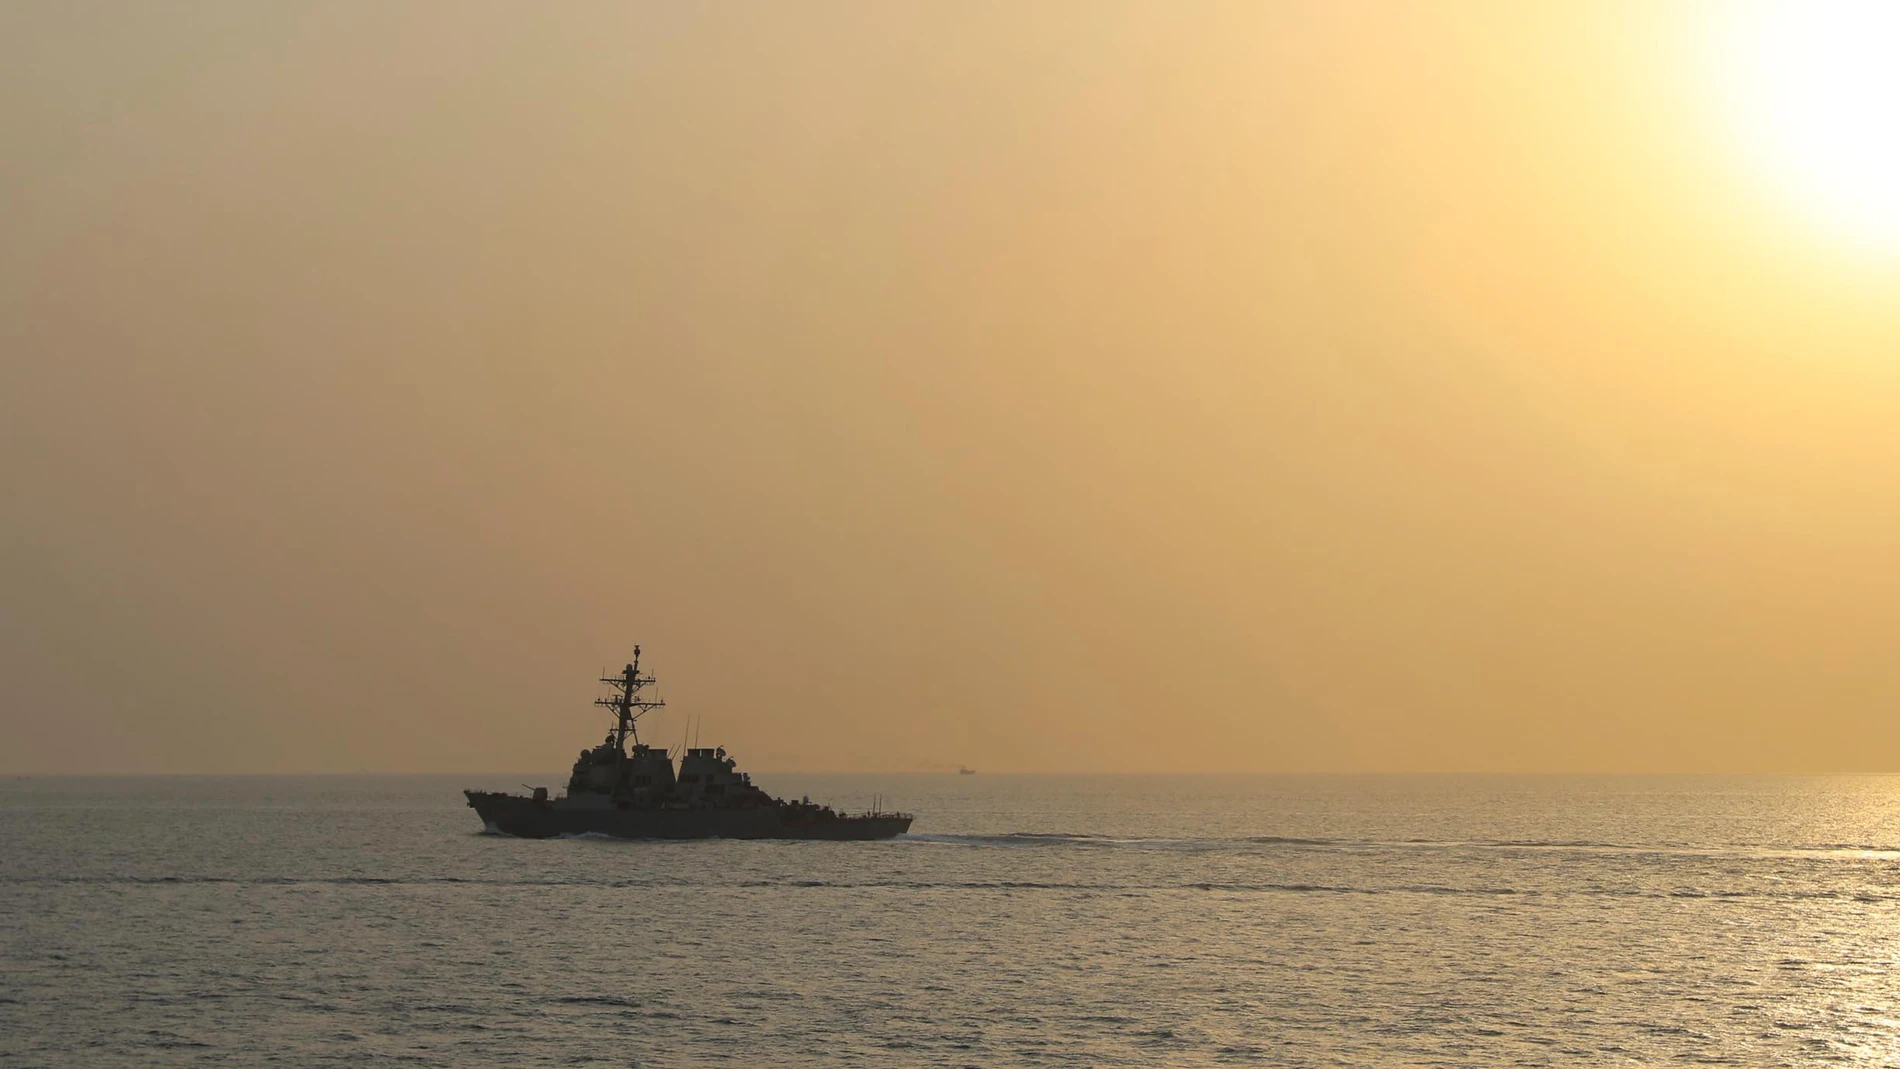 July 27, 2023, Strait of Hormuz, Oman: The U.S. Navy Arleigh-burke class guided-missile destroyer USS Thomas Hudner patrols international shipping lanes at sunset, July 27, 2023 in the Strait of Hormuz. The U.S. Navy stepped up patrols after Iran harassed civilian shipping in the region. (Foto de ARCHIVO) 27/07/2023